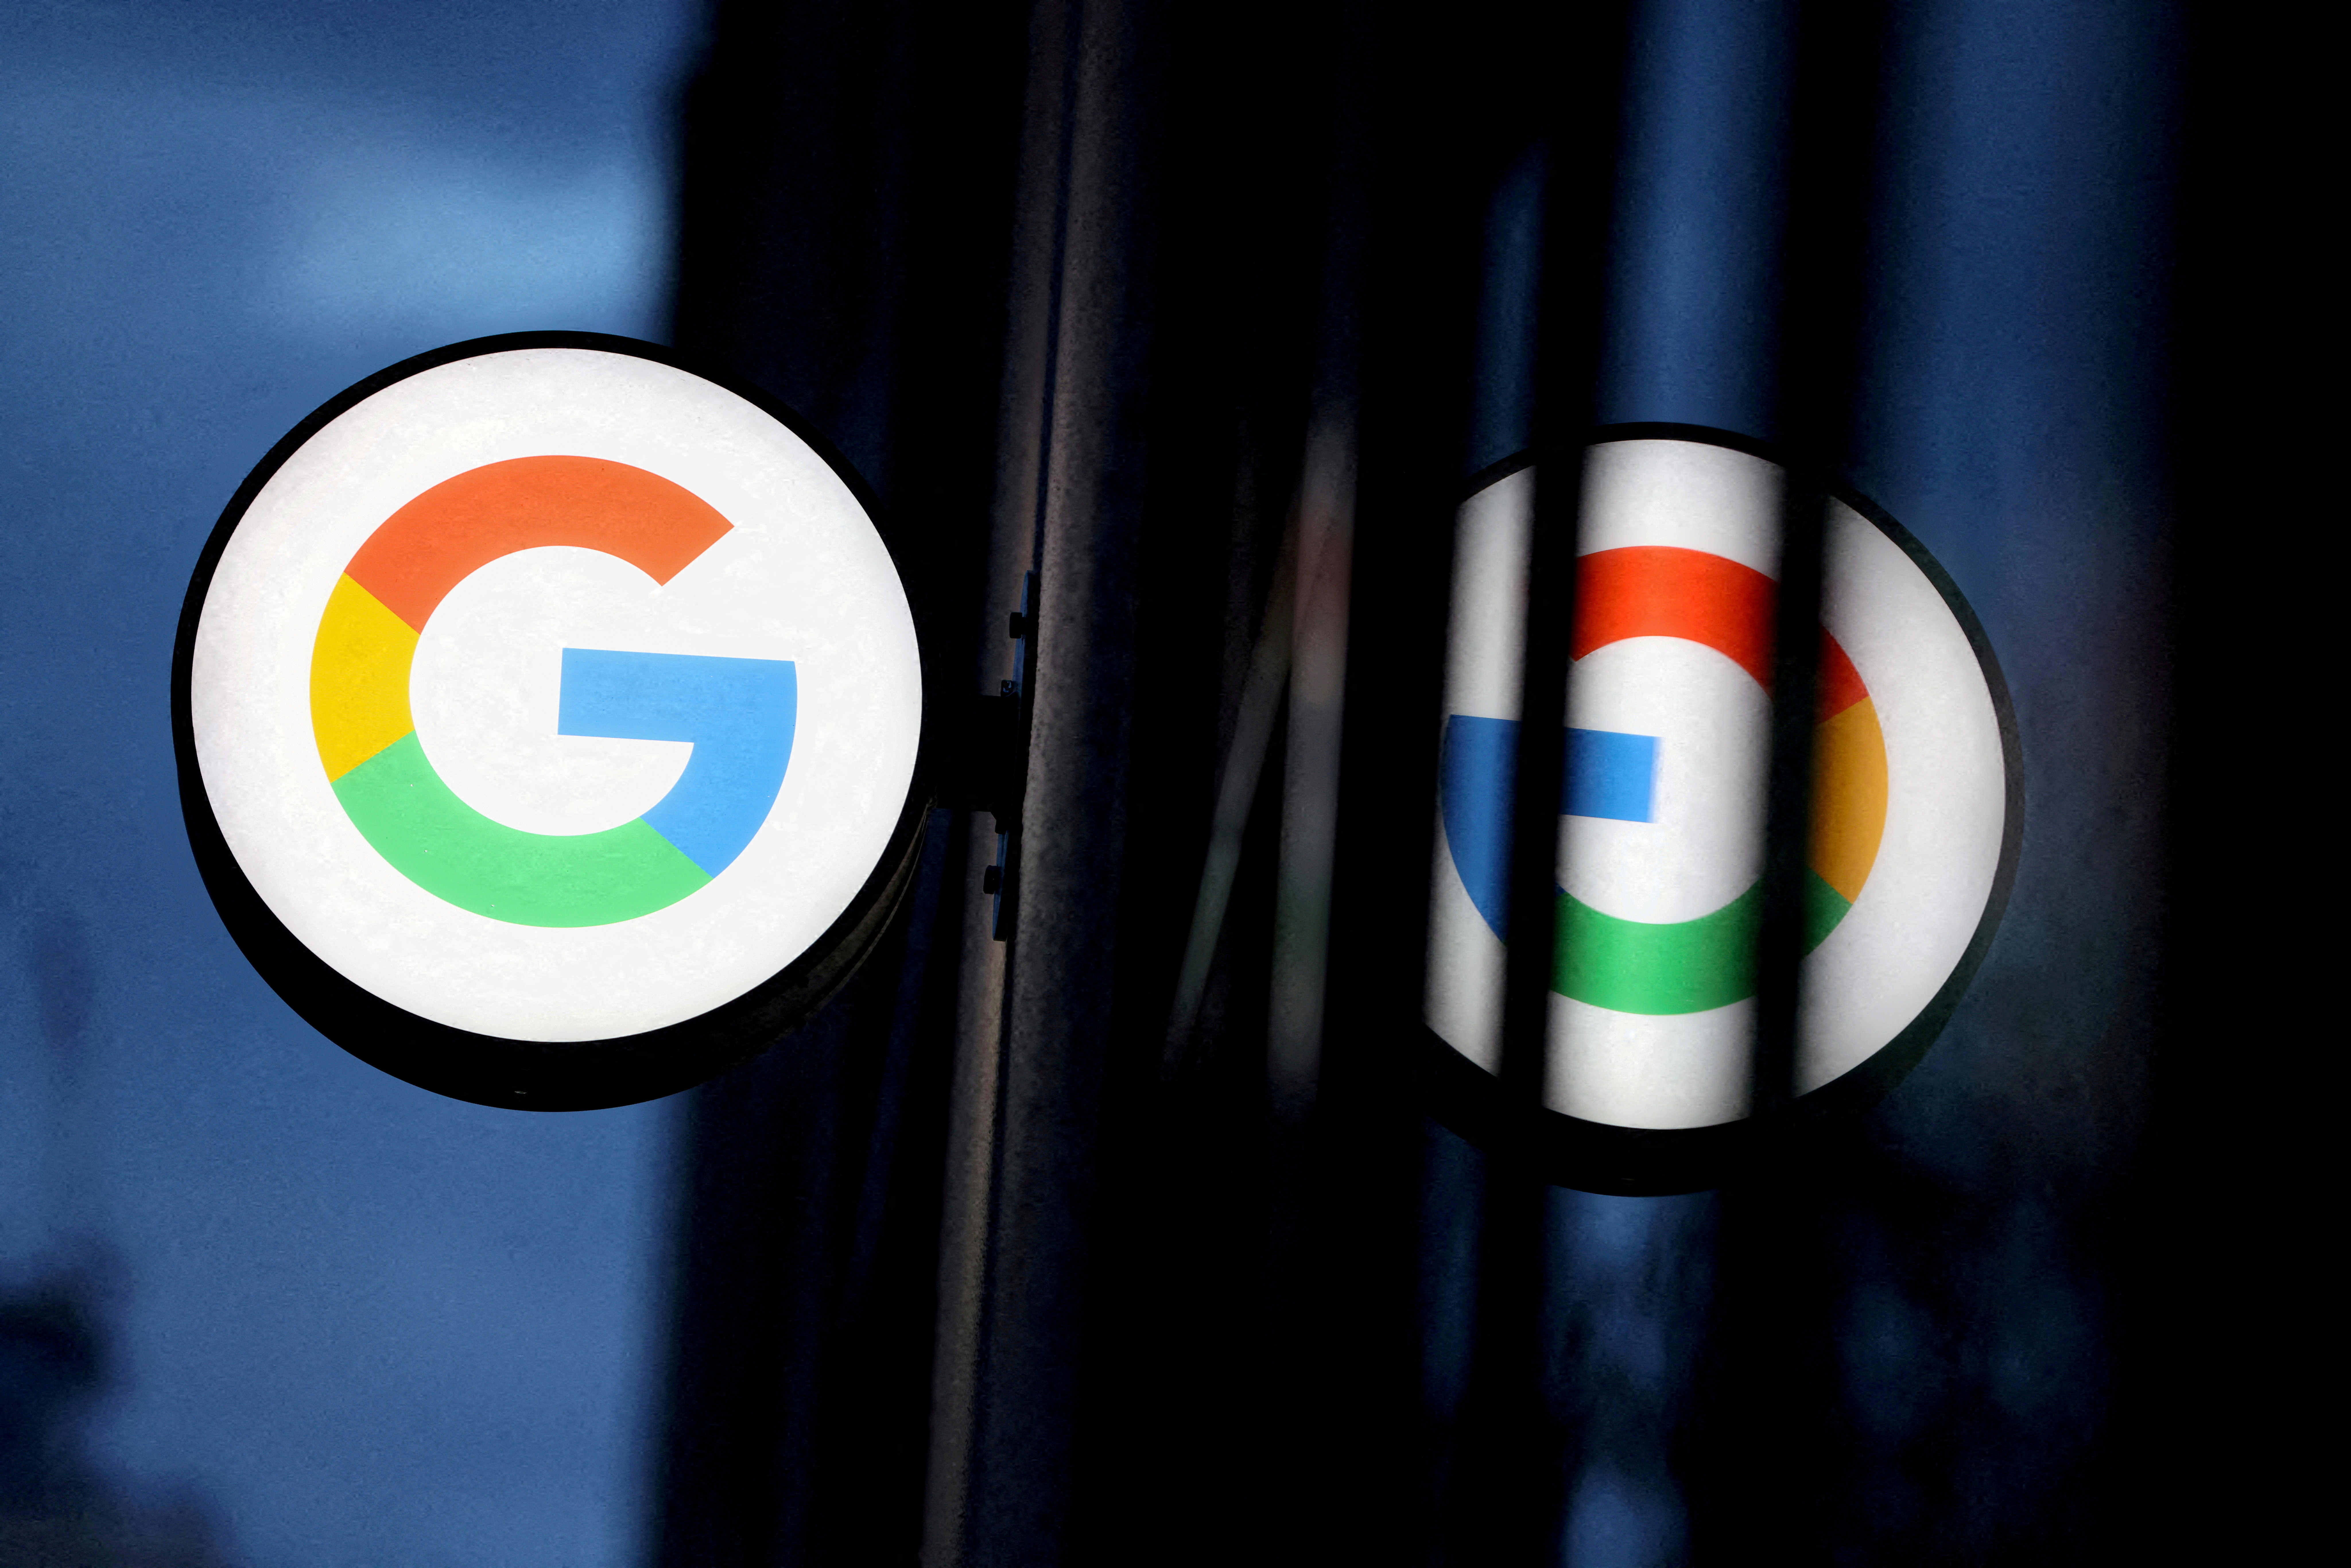 FILE PHOTO: The logo for Google LLC is seen at the Google Store Chelsea in Manhattan, New York City, US, November 17, 2021. REUTERS/Andrew Kelly/File Photo